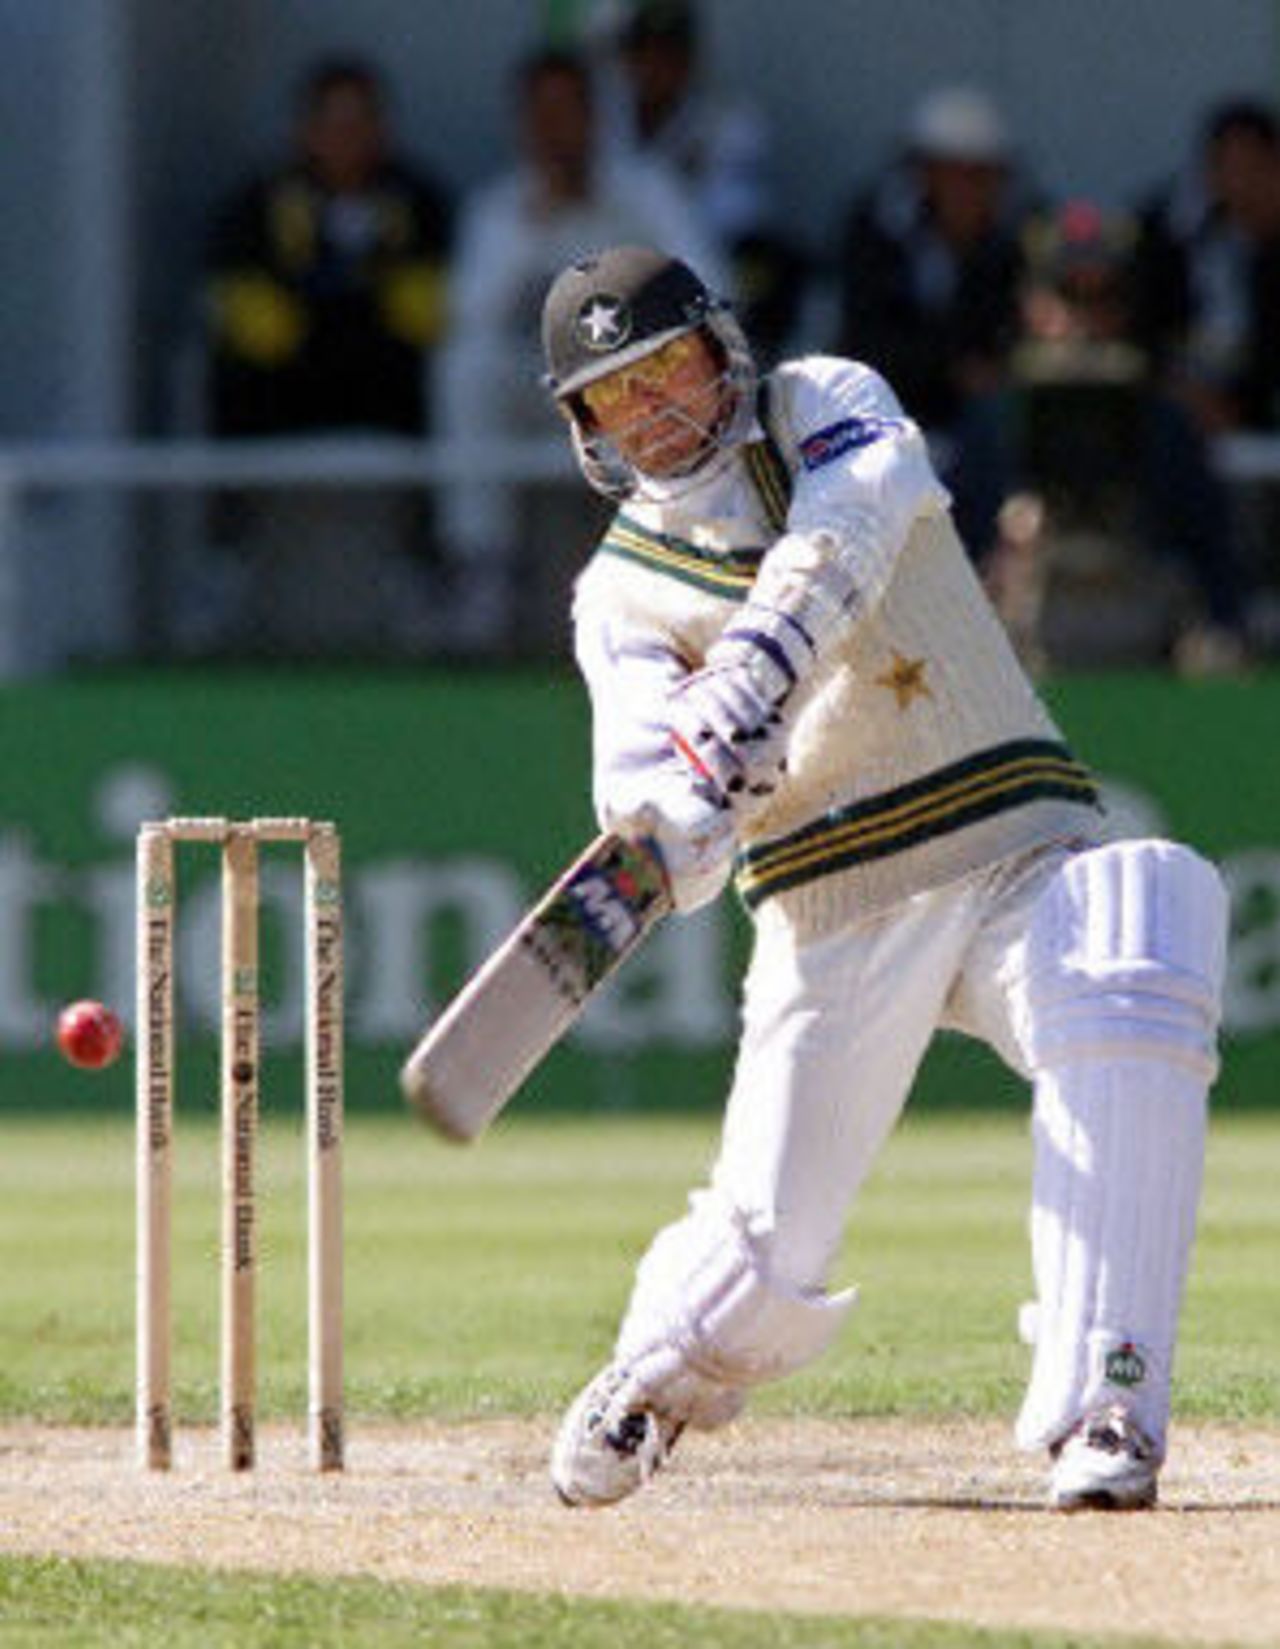 Pakistan batsman Saqlain Mushtaq crashes a ball over the covers on his way to 98 not out, day 4, 2nd Test at Christchurch, 15-19 March 2001.